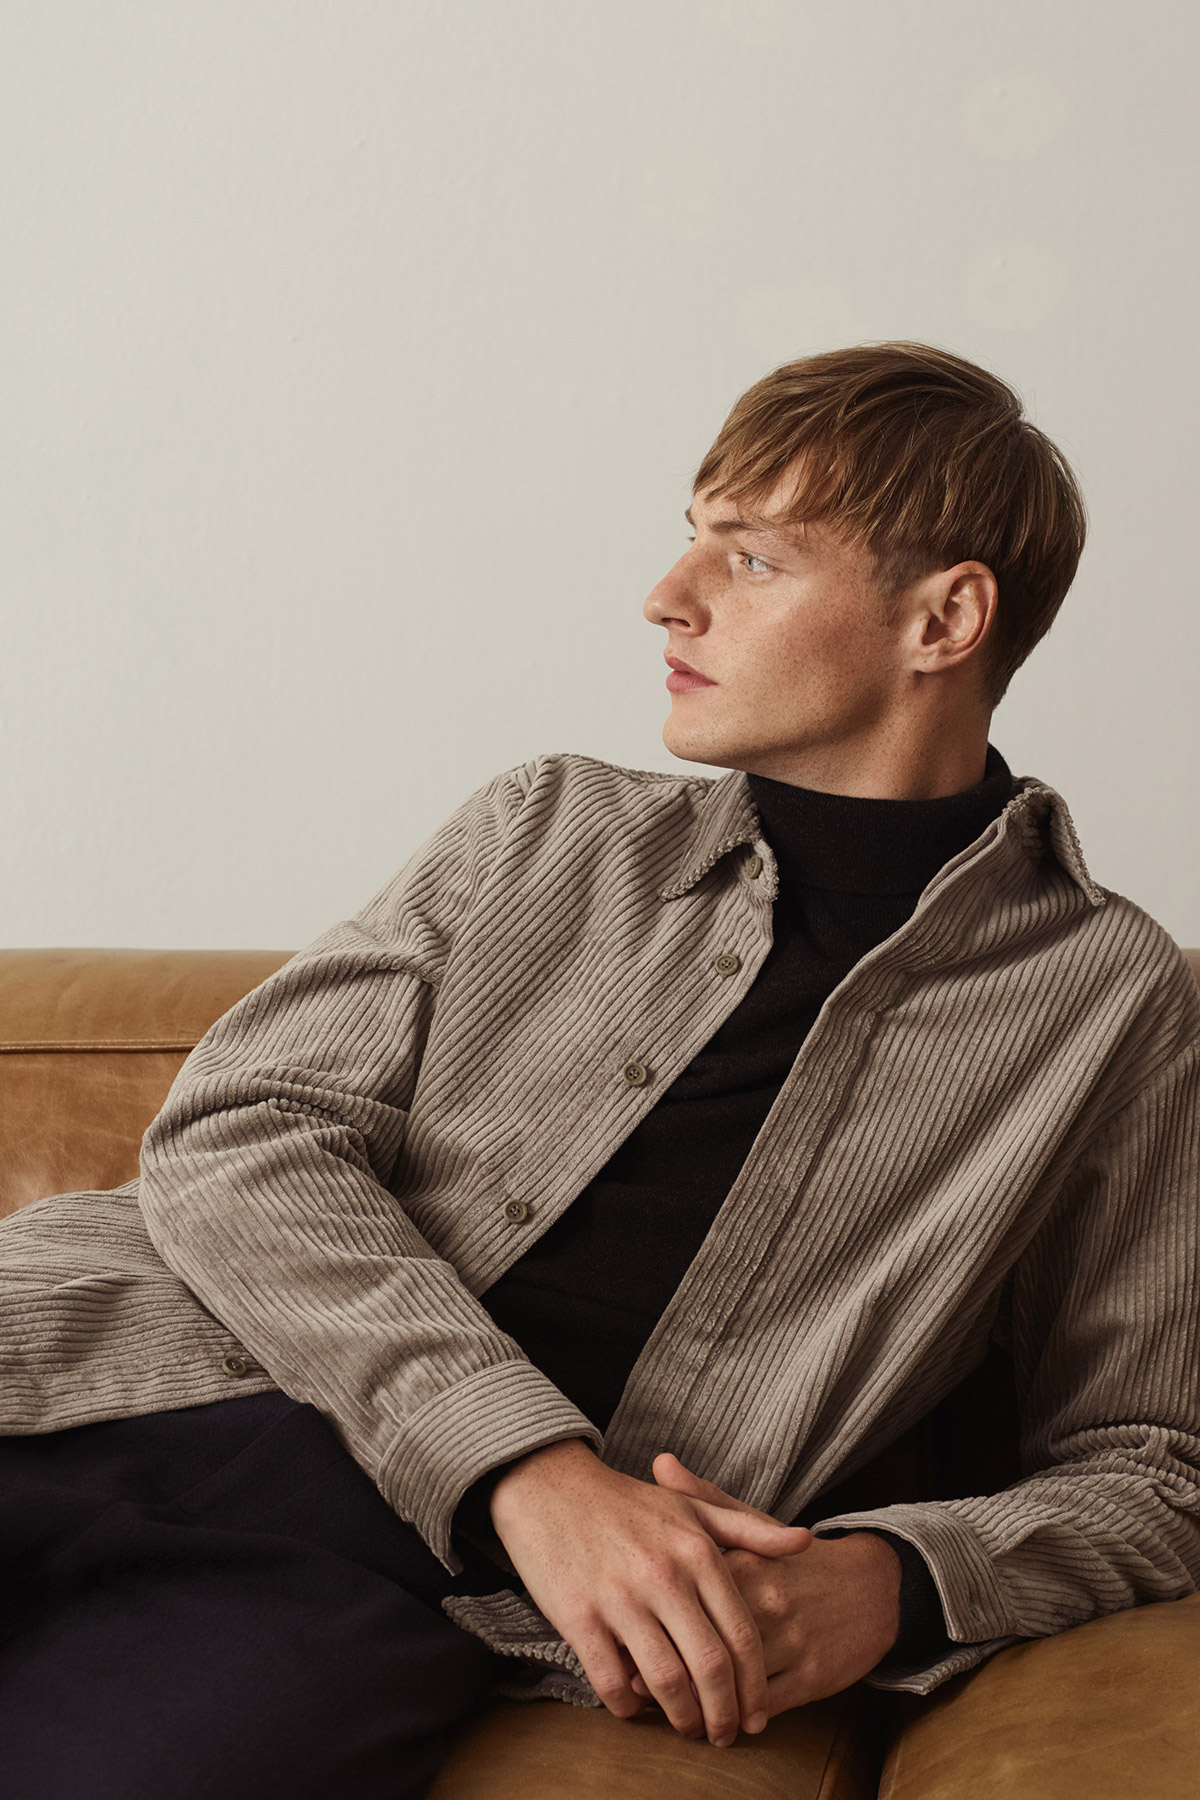 COS Essentials: a new selection of staples for everyday: discover timeless pieces in rich shades, designed for easy autumn days…​ ​Shop essentials: ​festivalwalk